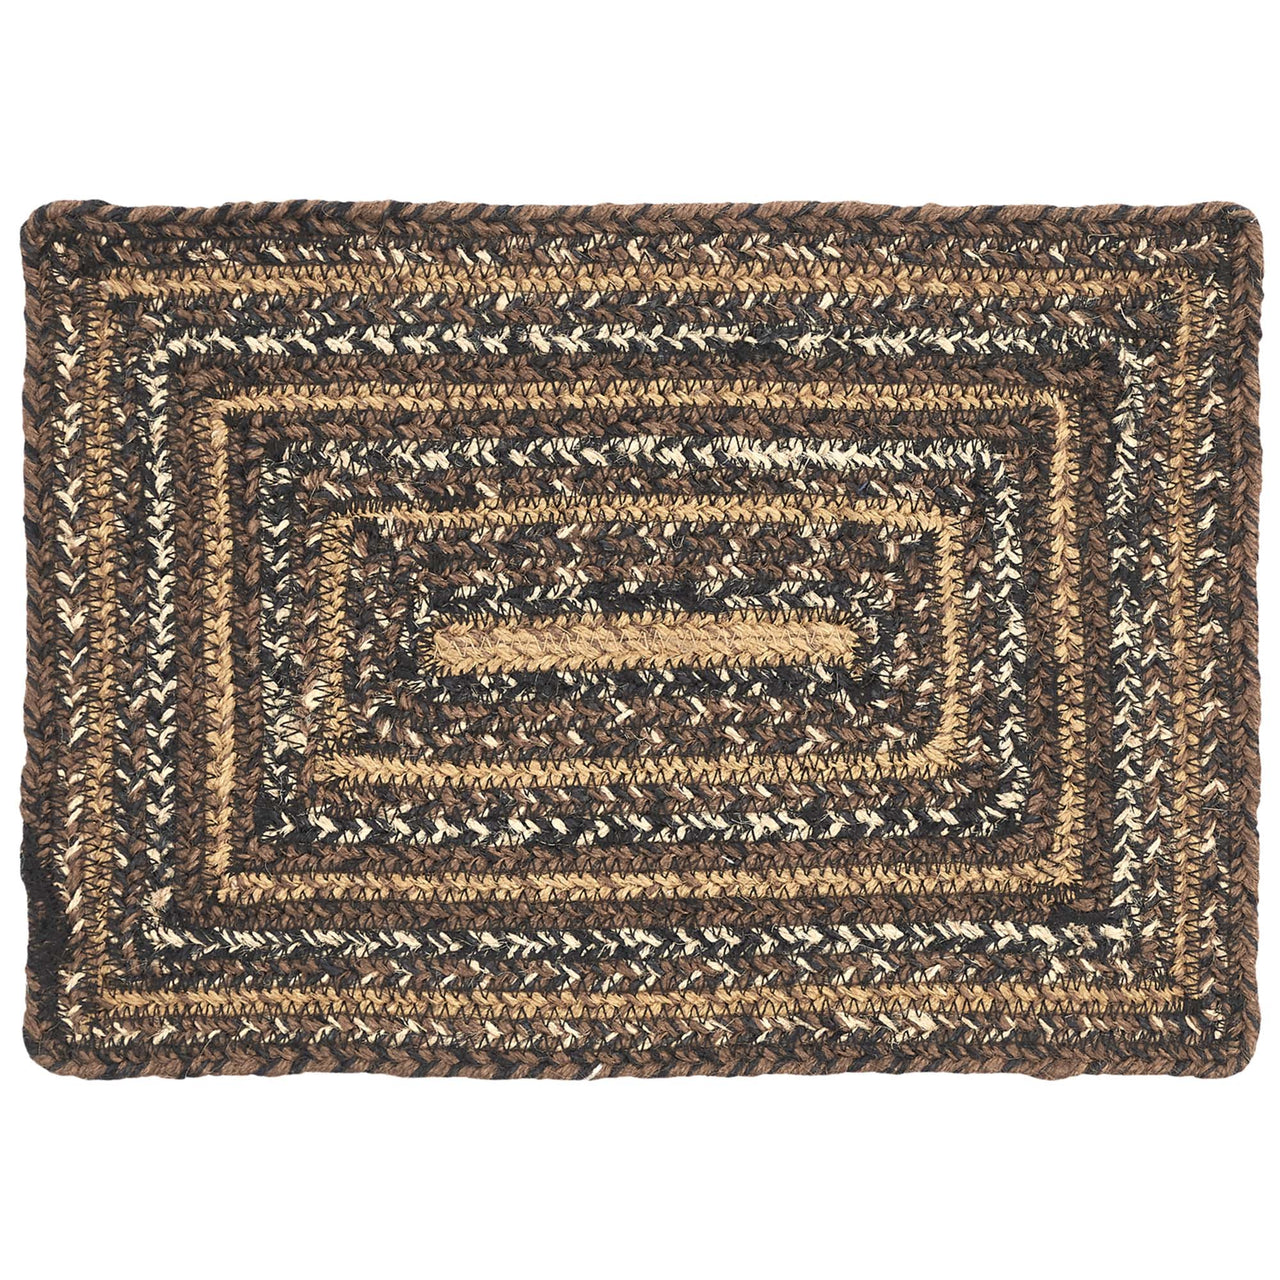 Espresso Jute Braided Rect Placemat 10"x15" VHC Brands